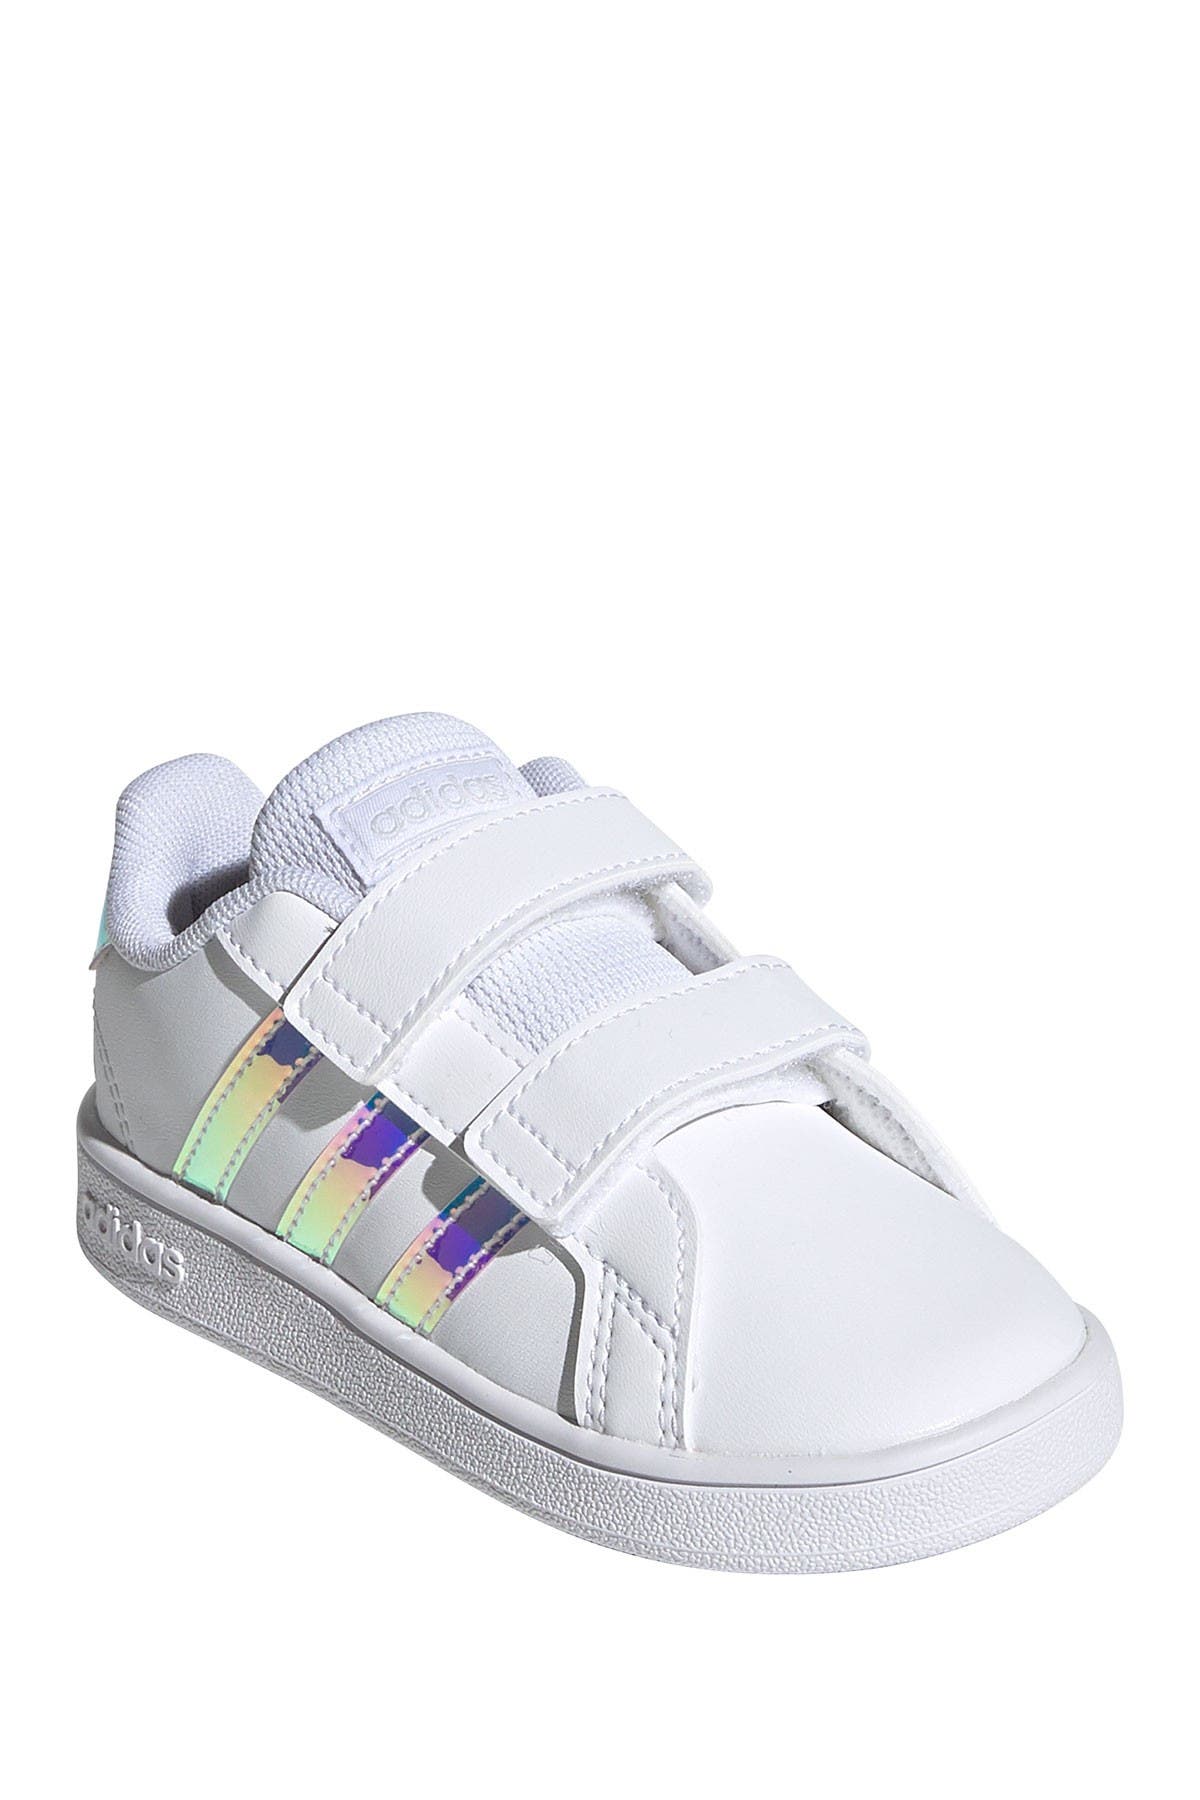 adidas for girls shoes